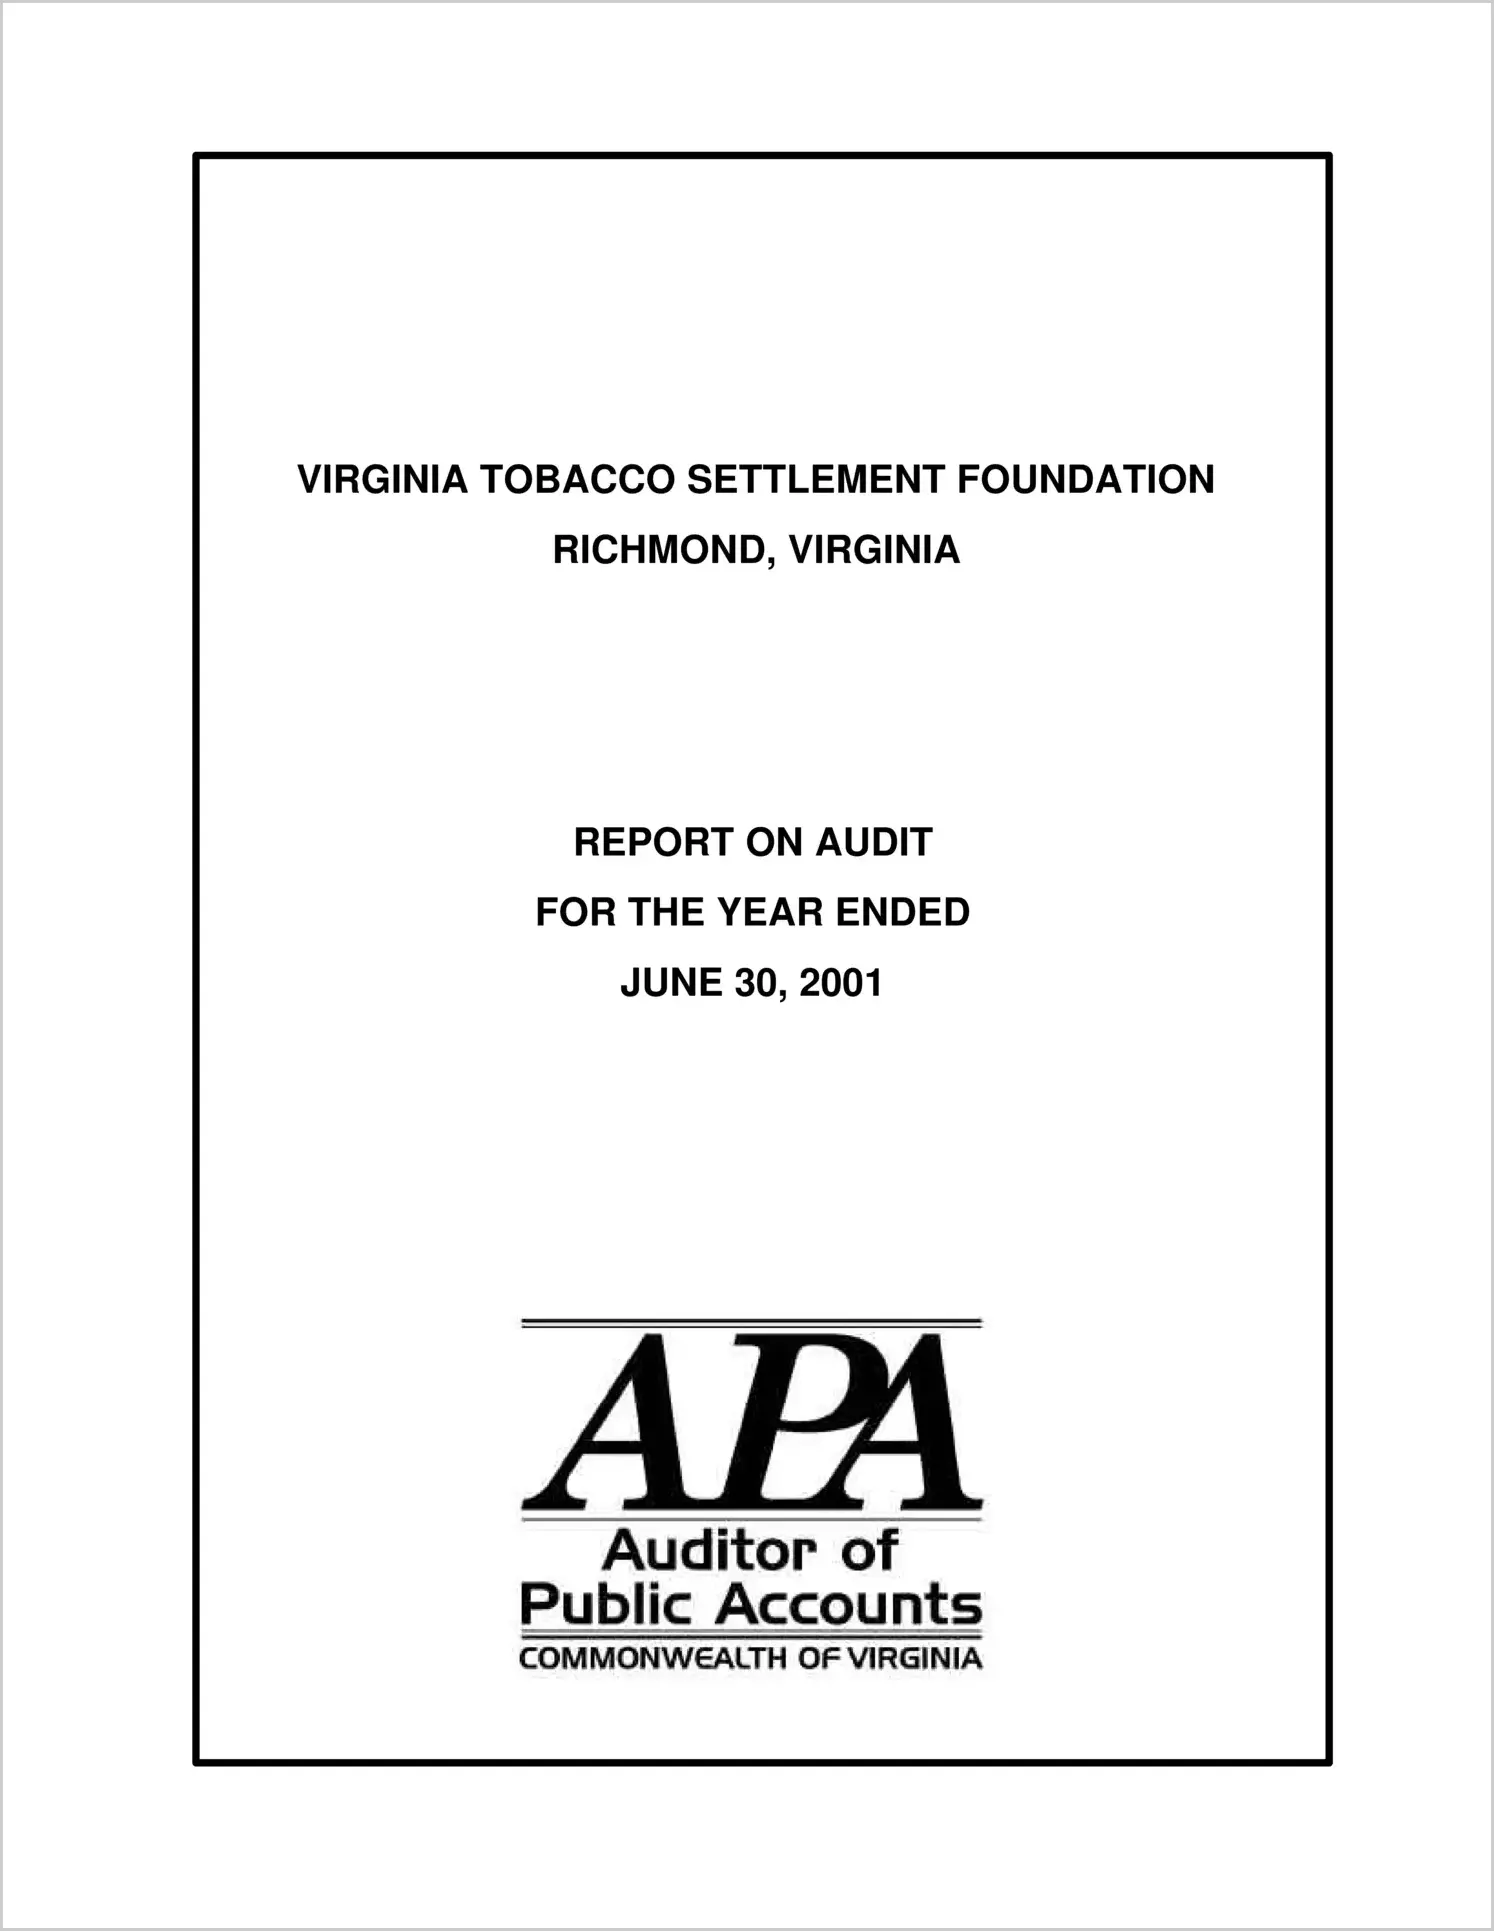 Virginia Tobacco Settlement Foundation for the period ended June 30, 2001